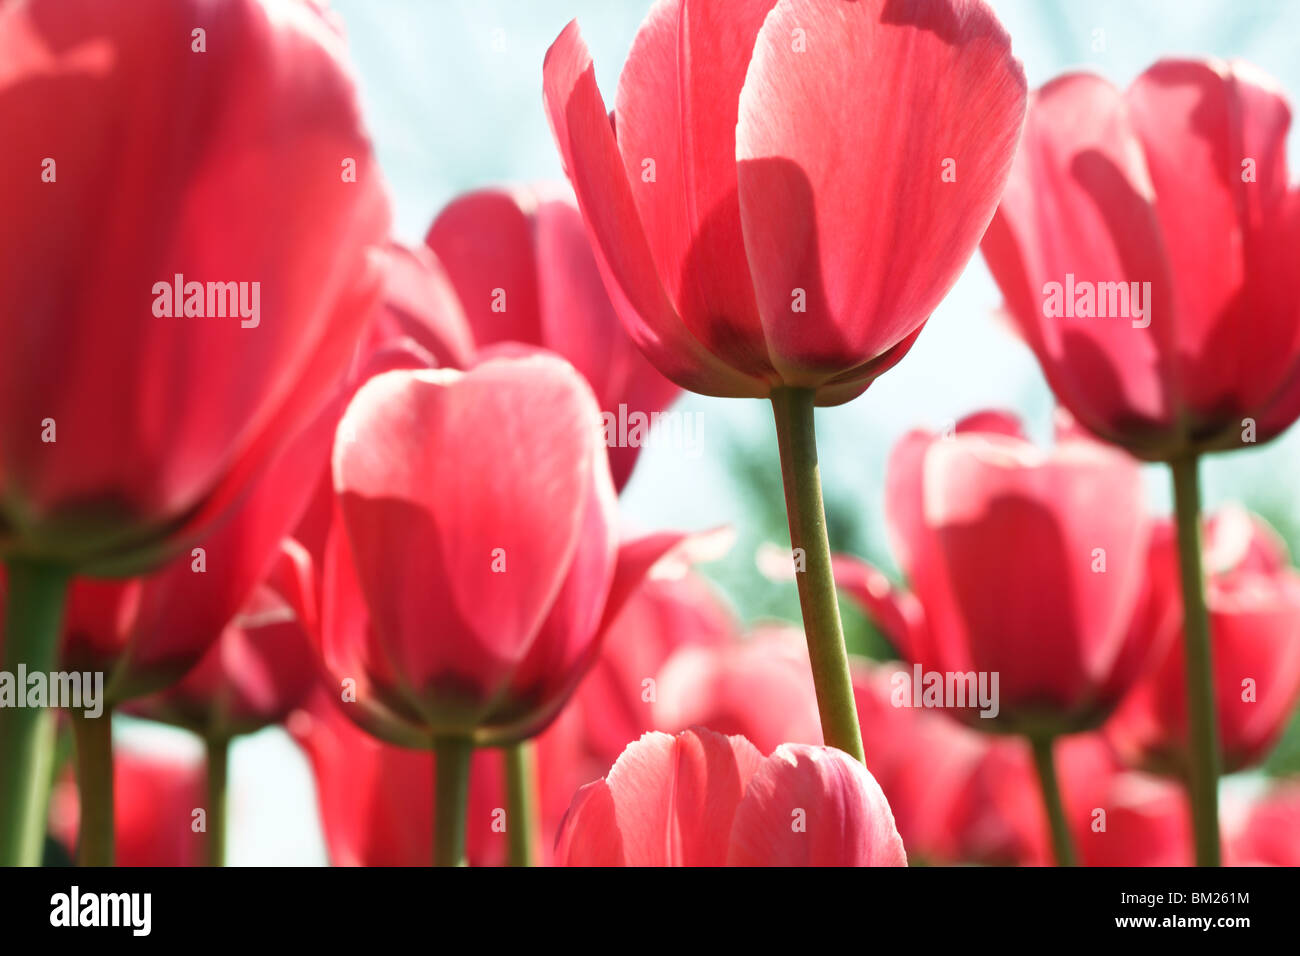 Blooming red tulips,Closeup. Stock Photo